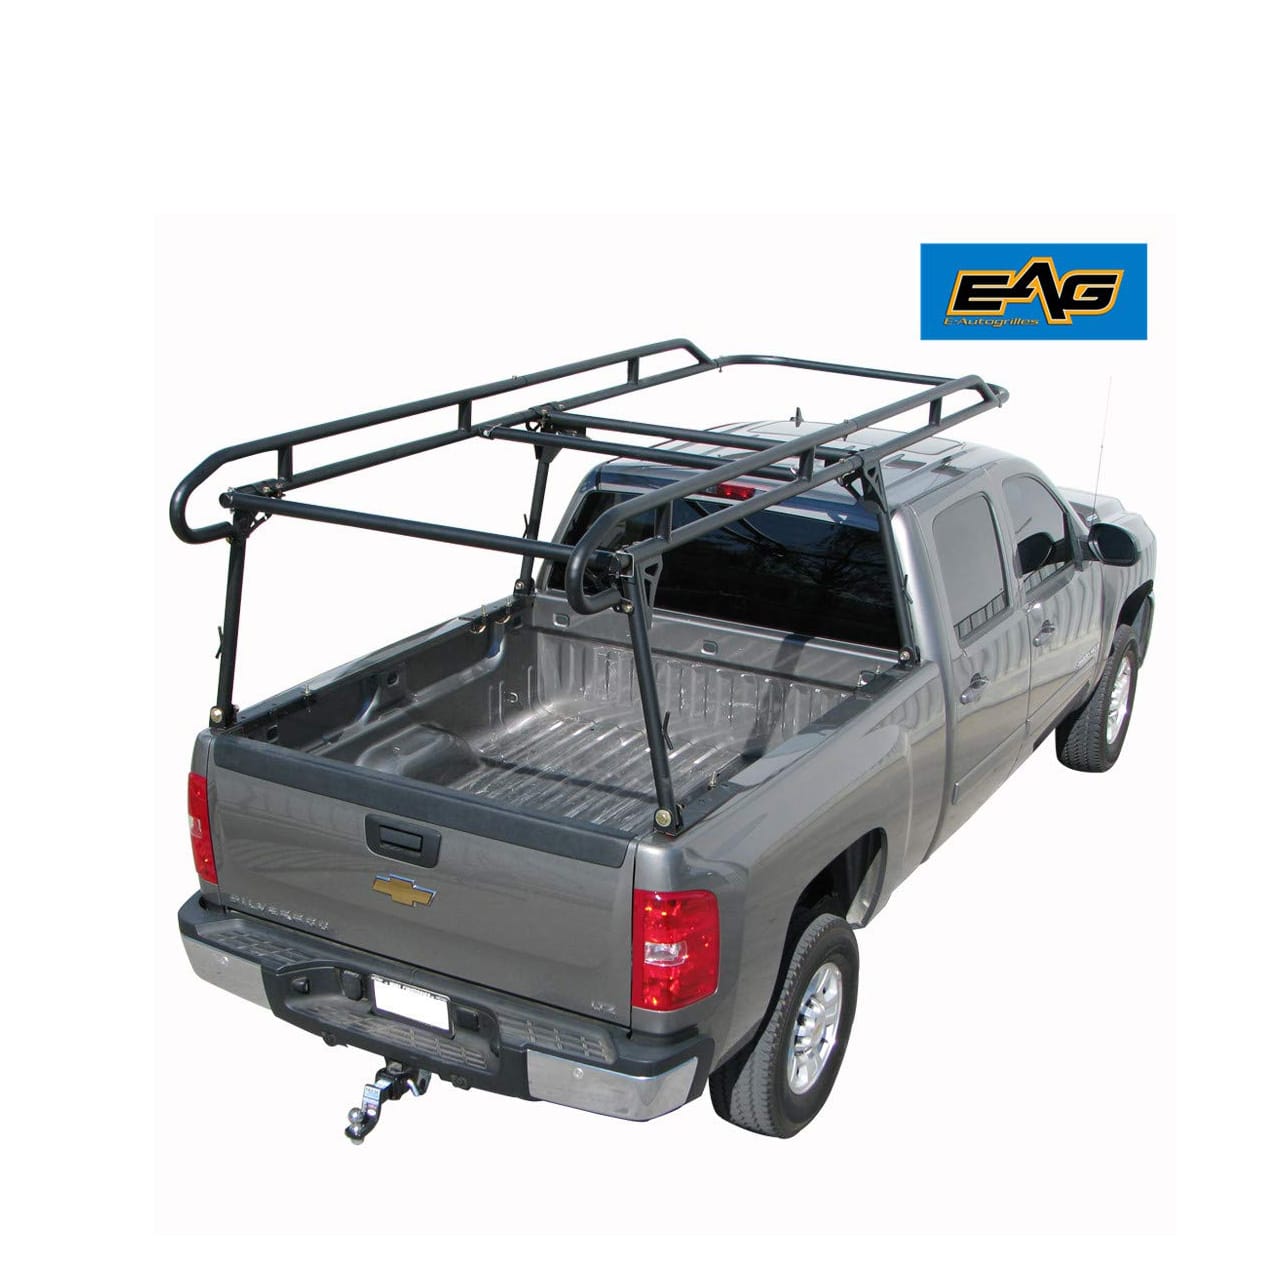 SANJODS Roof Rack Replacement For Honda Pilot 2009 2015 Pair OE Style